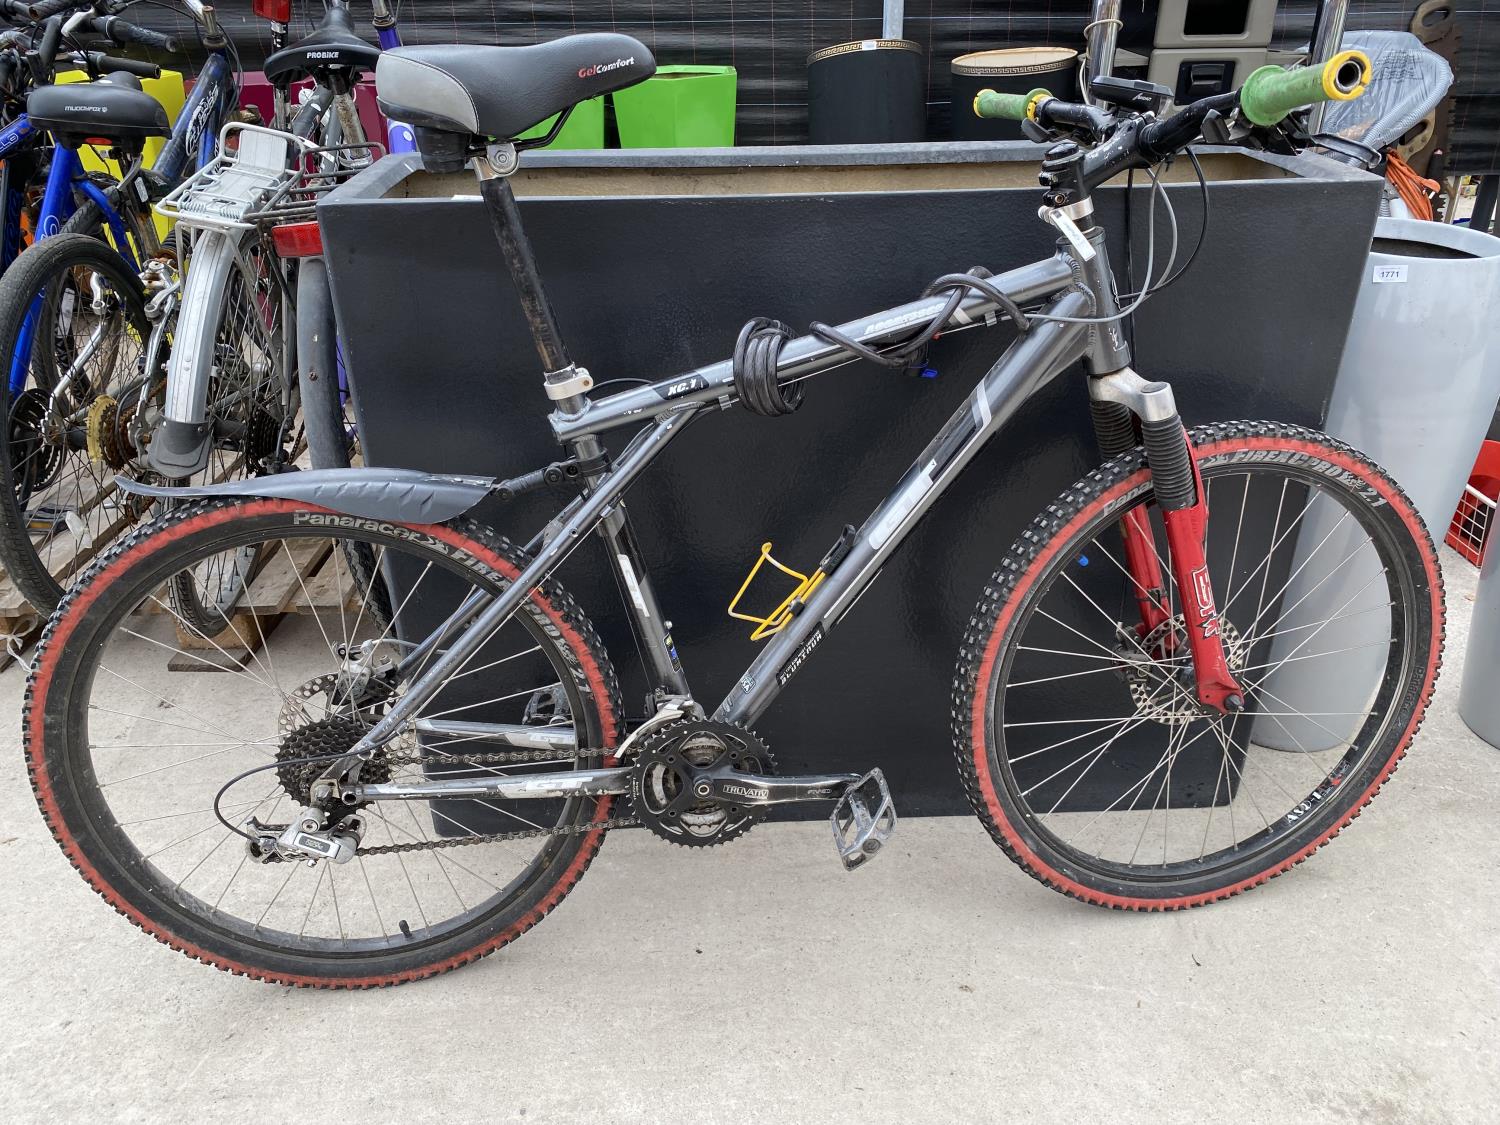 A GENTS GT AGGRESSOR MOUNTAIN BIKE WITH FRONT SUSPENSION AND 24 SPEED GEAR SYSTEM